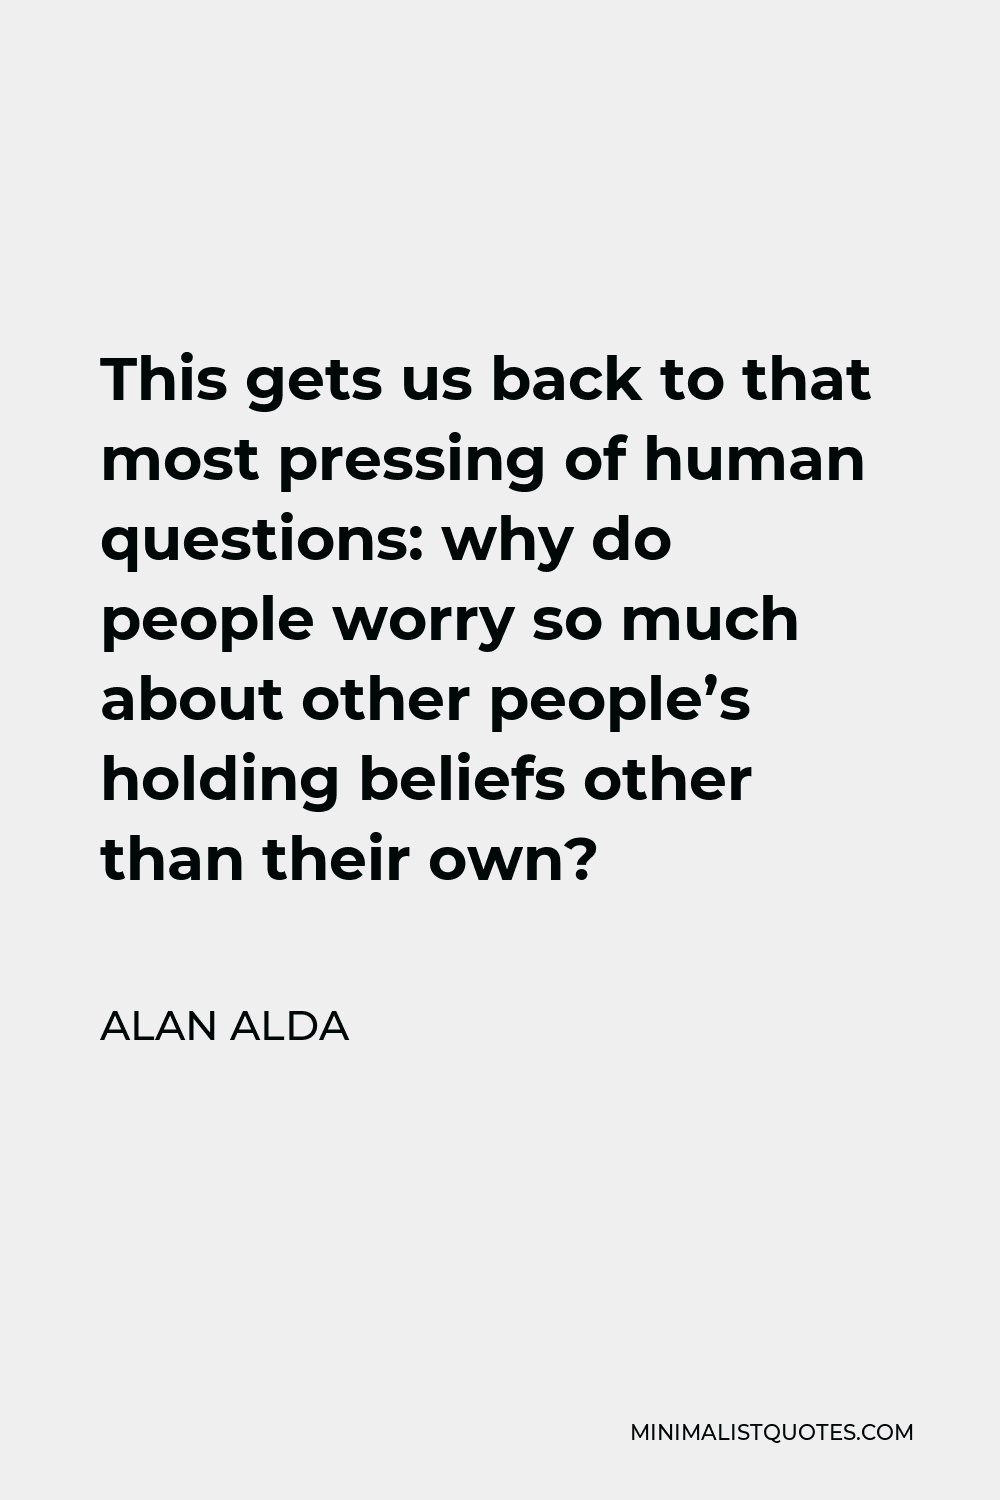 Alan Alda Quote - This gets us back to that most pressing of human questions: why do people worry so much about other people’s holding beliefs other than their own?